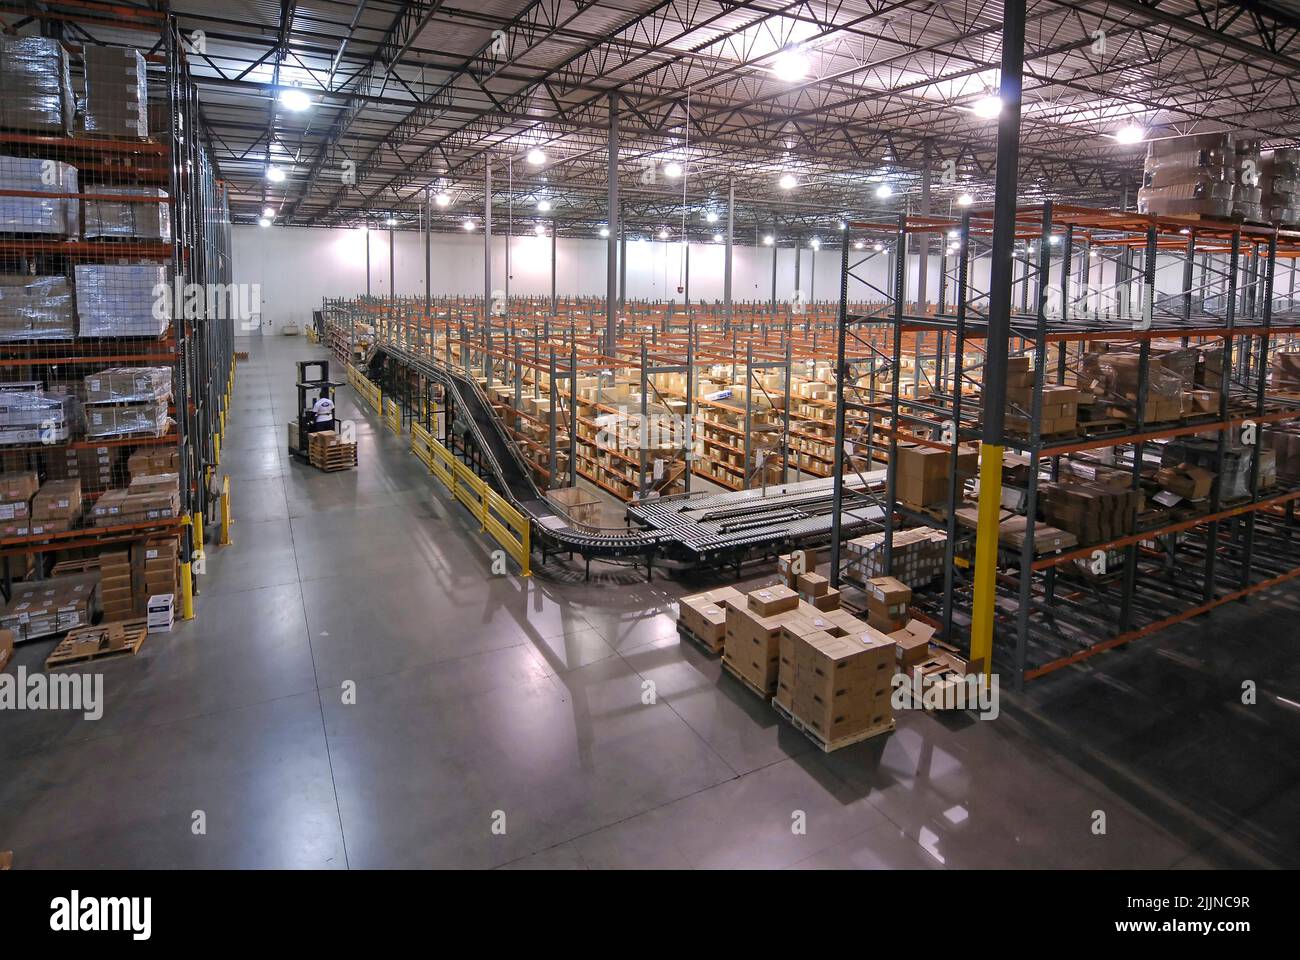 An interior view of a large warehouse full of packages in Saint Louis, Missouri USA. Stock Photo